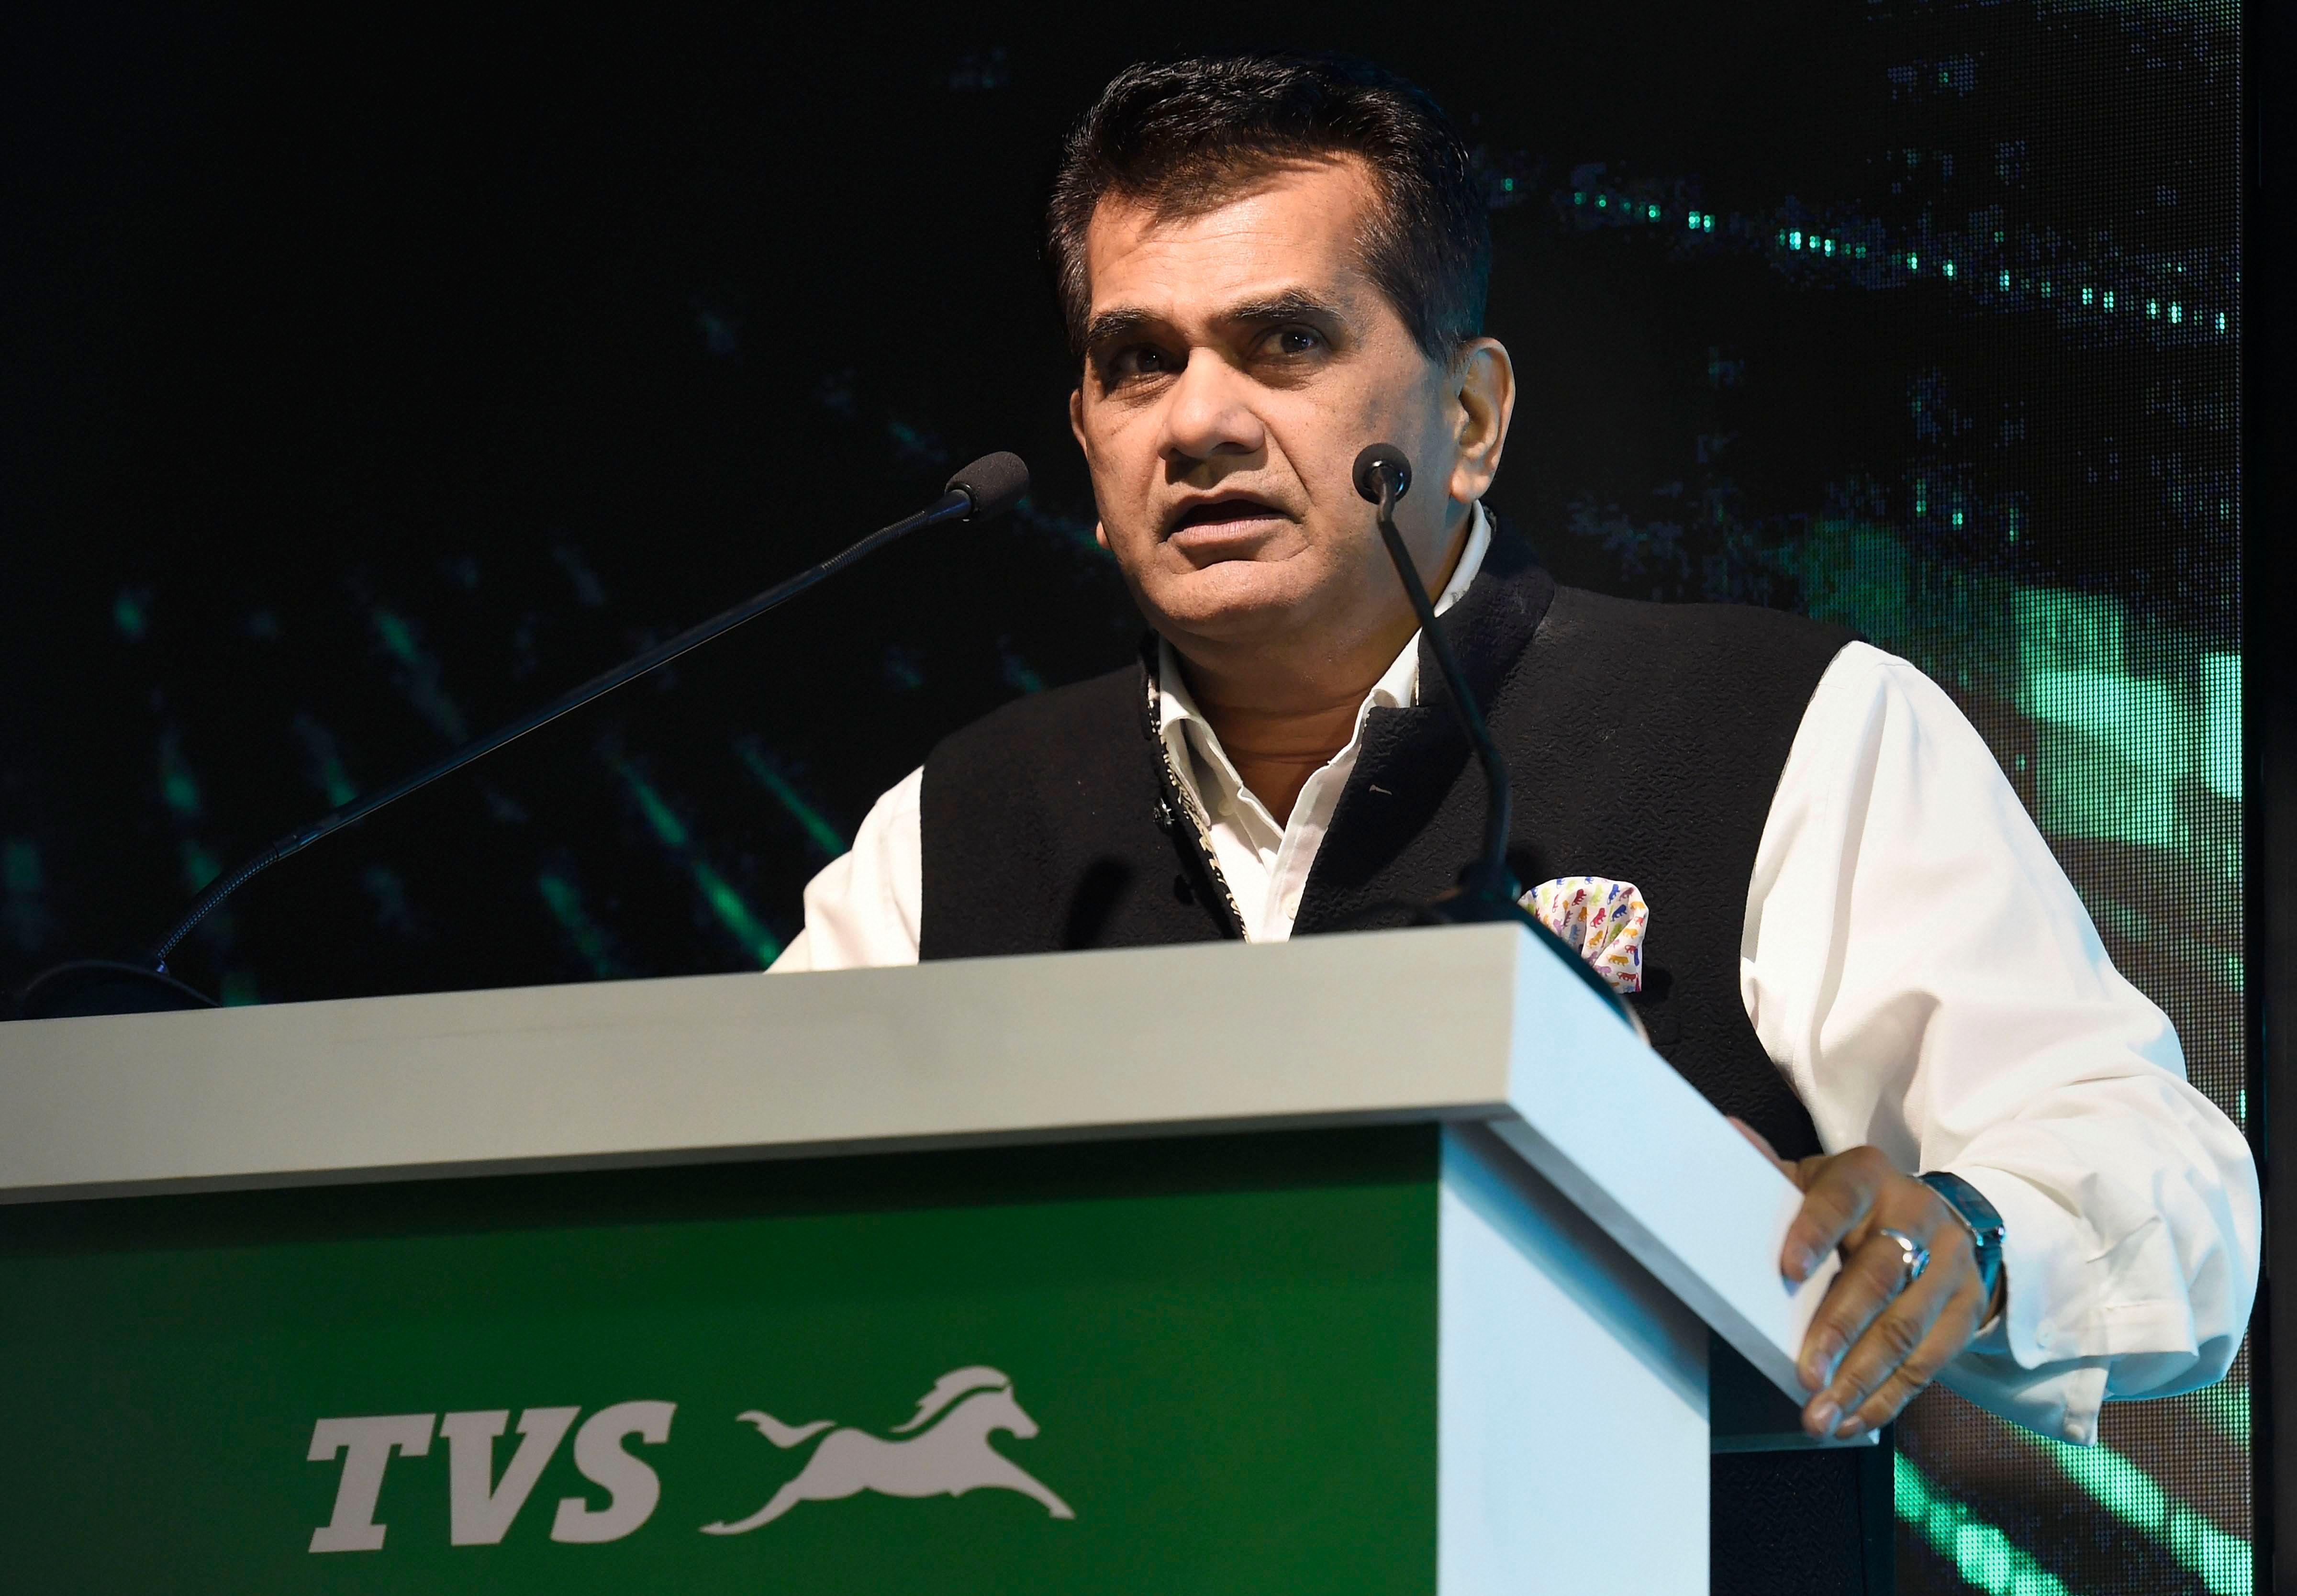 Amitabh Kant said India is working to boost the biotechnology sector under the flagship programmes like 'Make in India' and 'Startup India'.